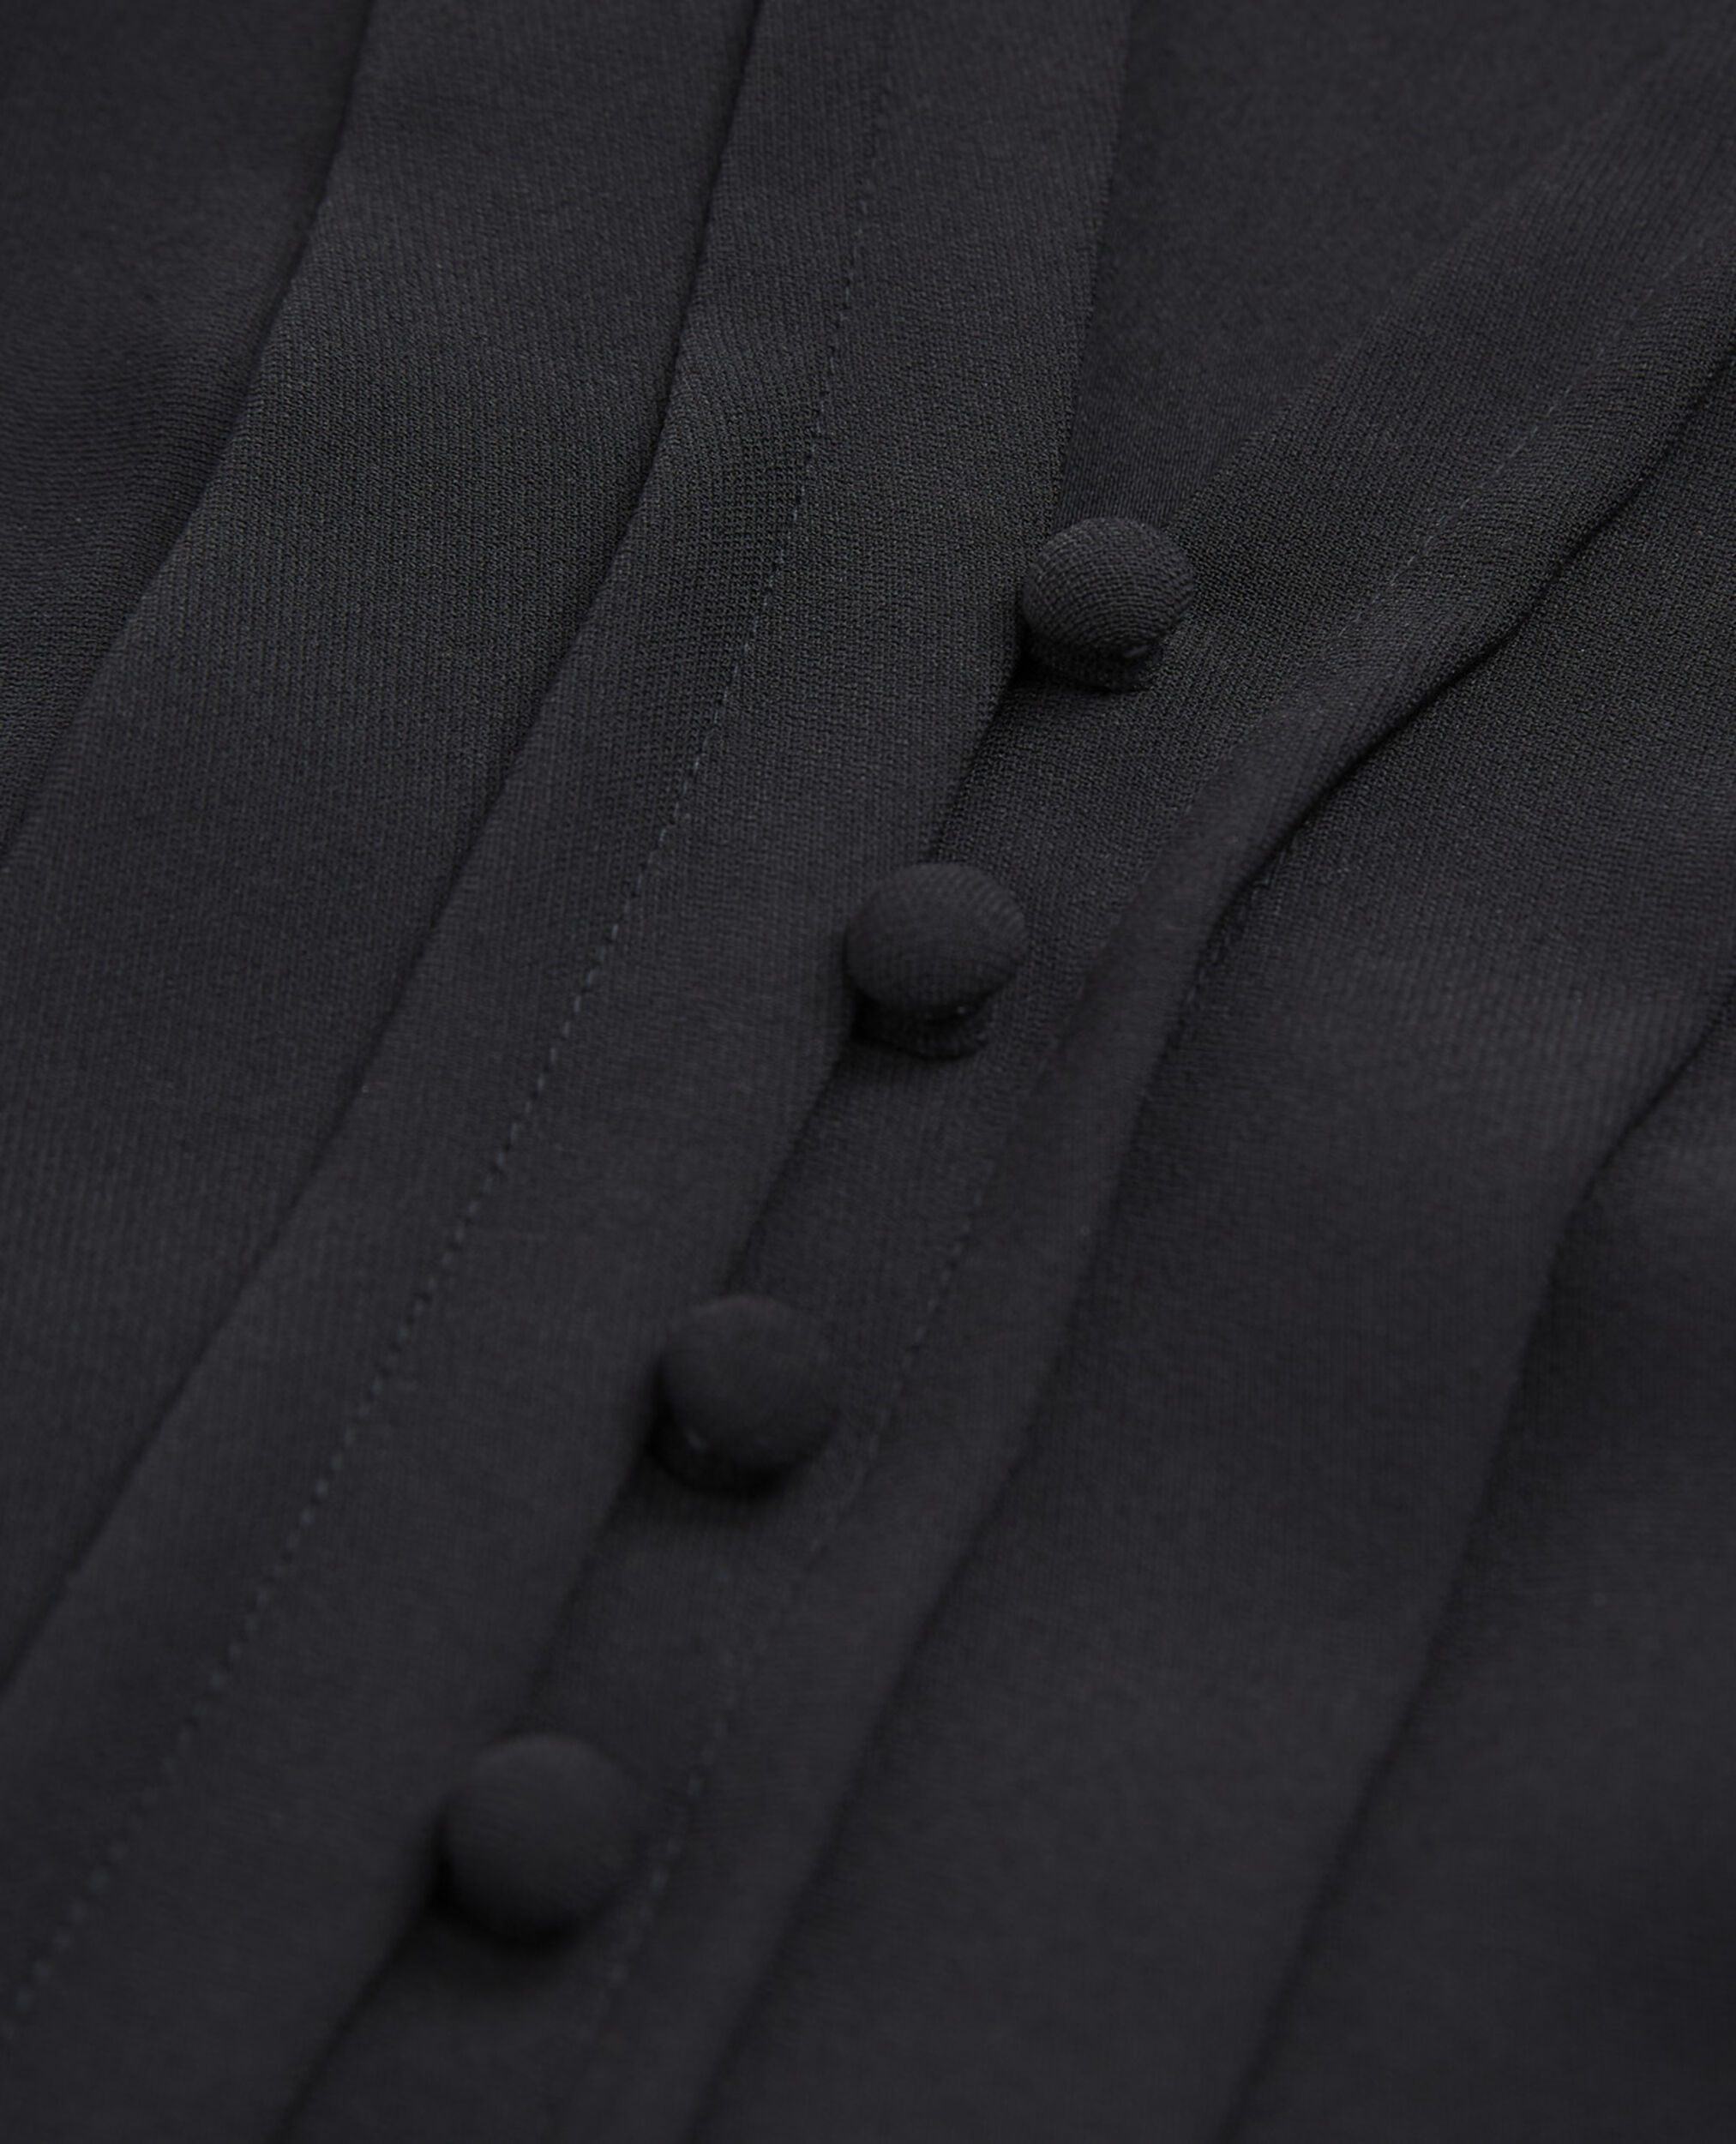 Black crepe top with V-neck - covered buttons, BLACK, hi-res image number null